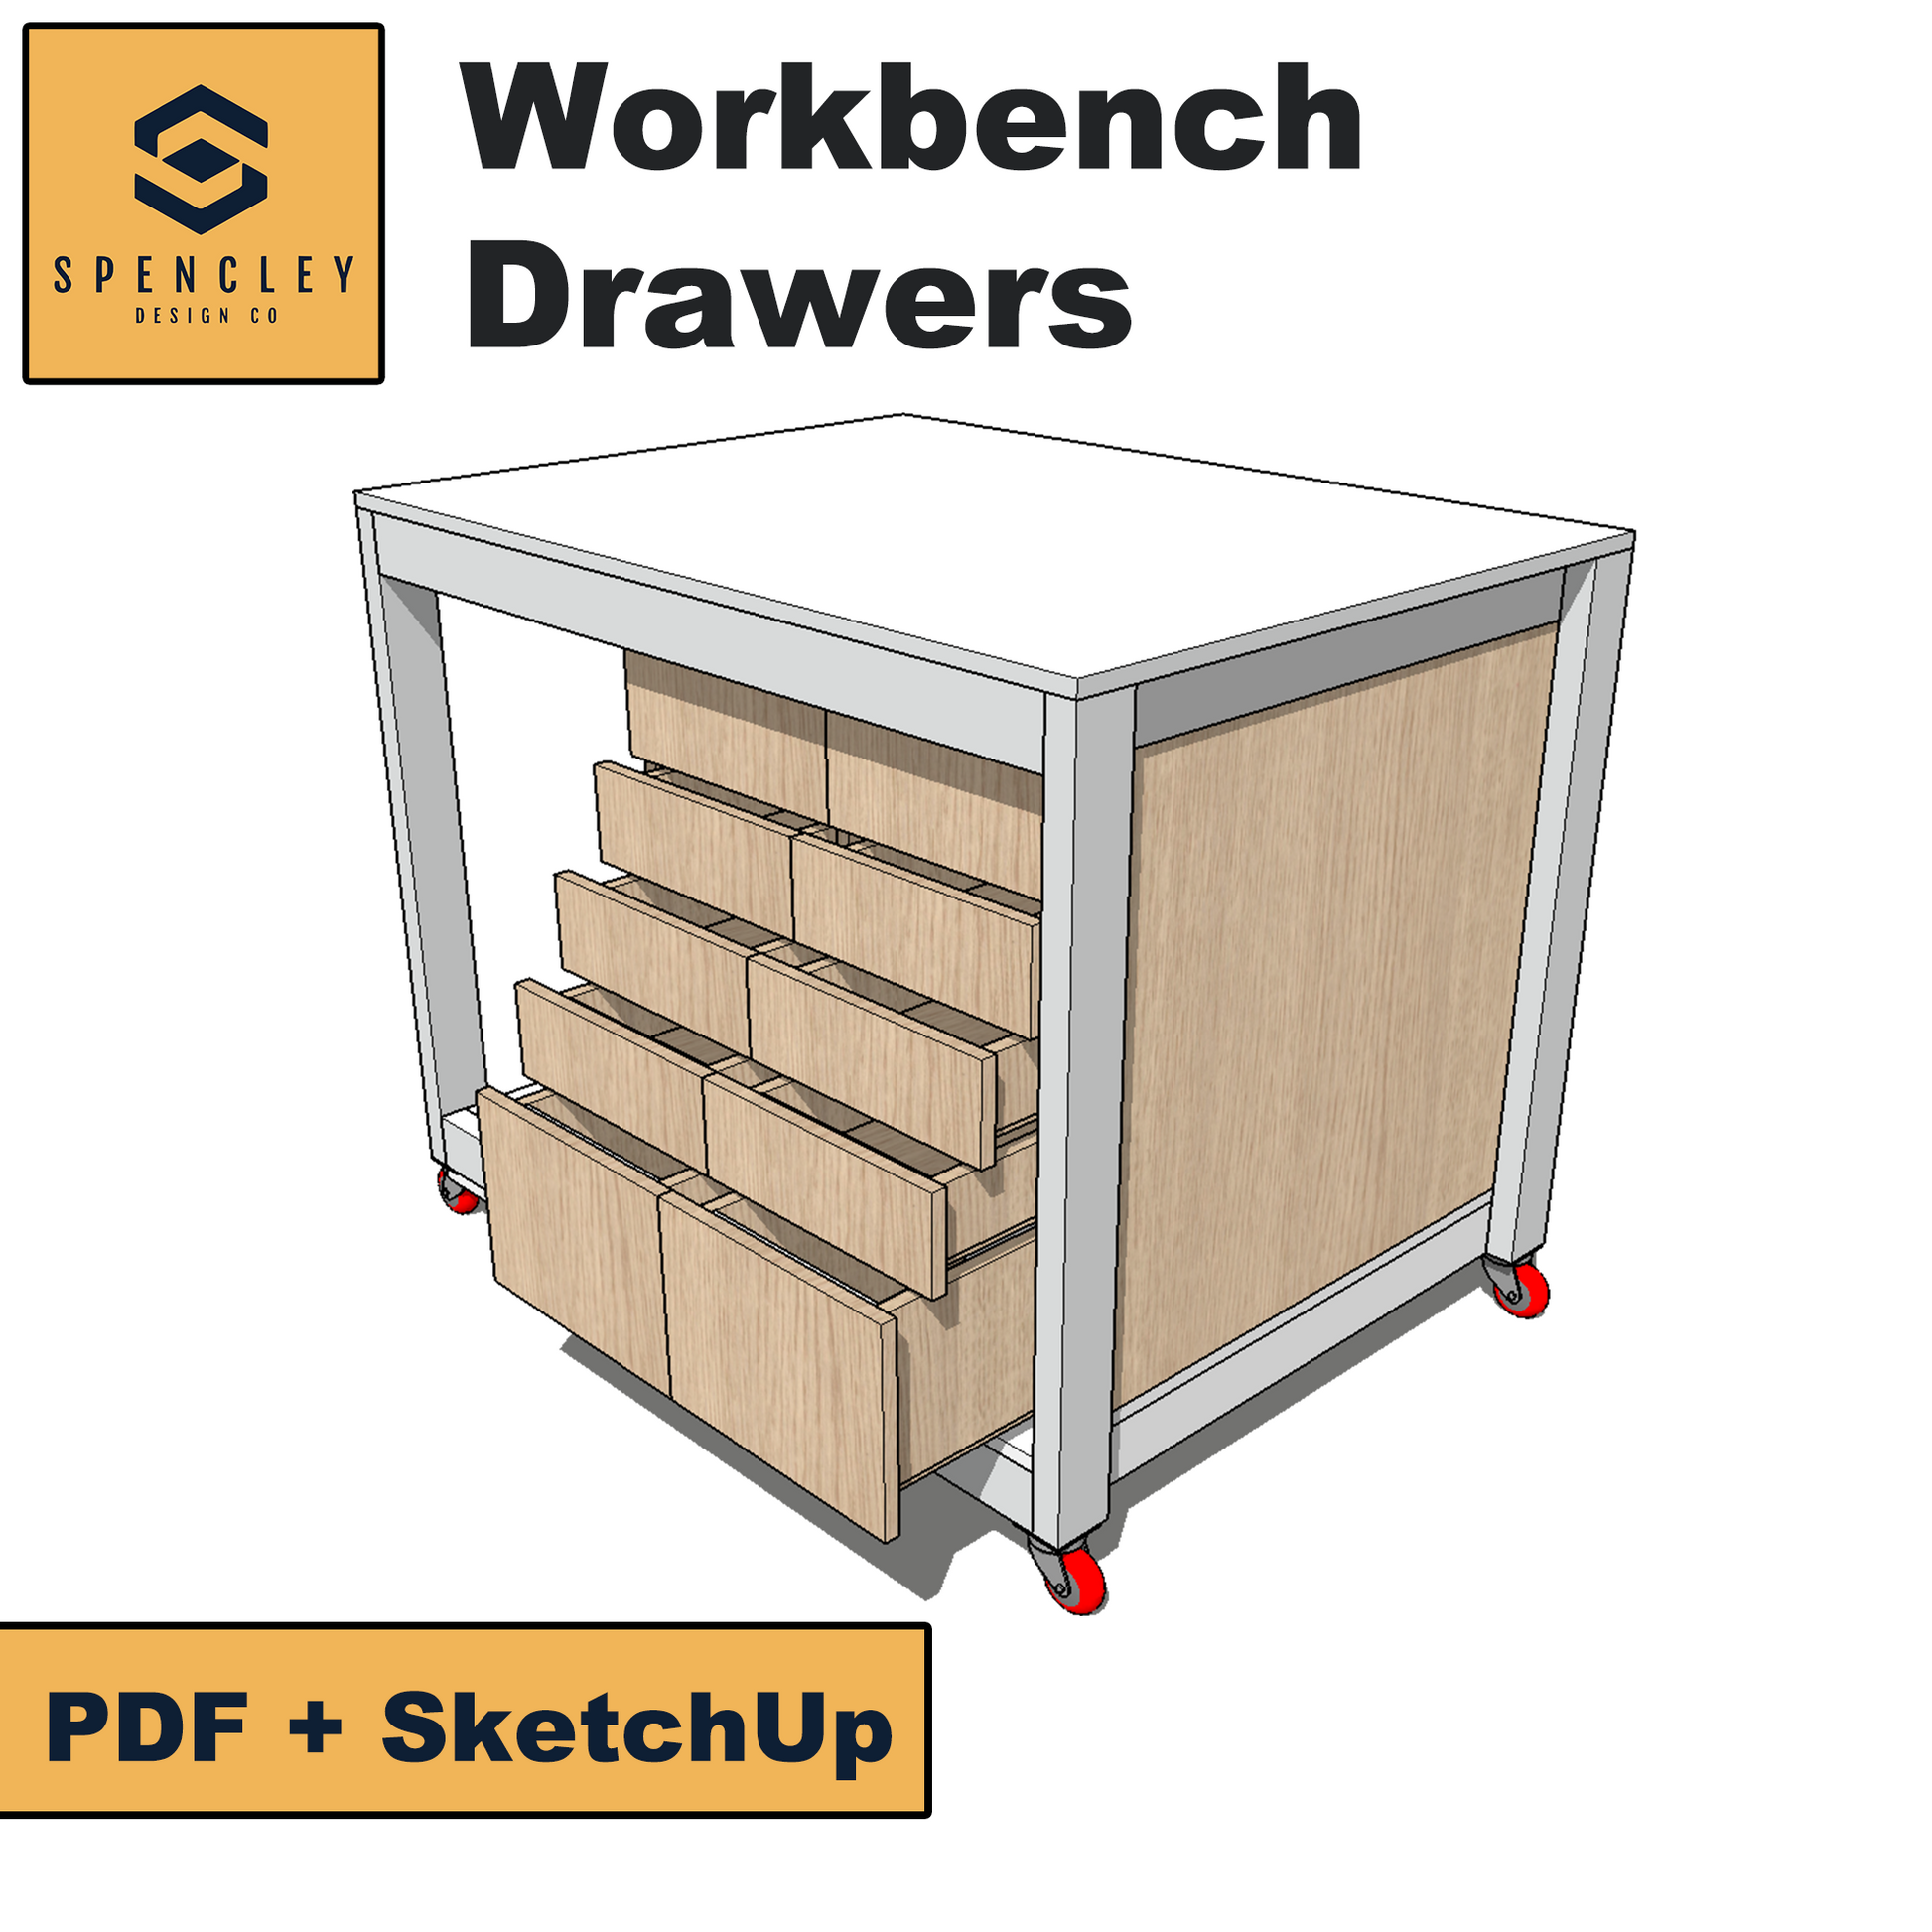 Spencley Design Co - WORKBENCH DRAWERS - PLANS